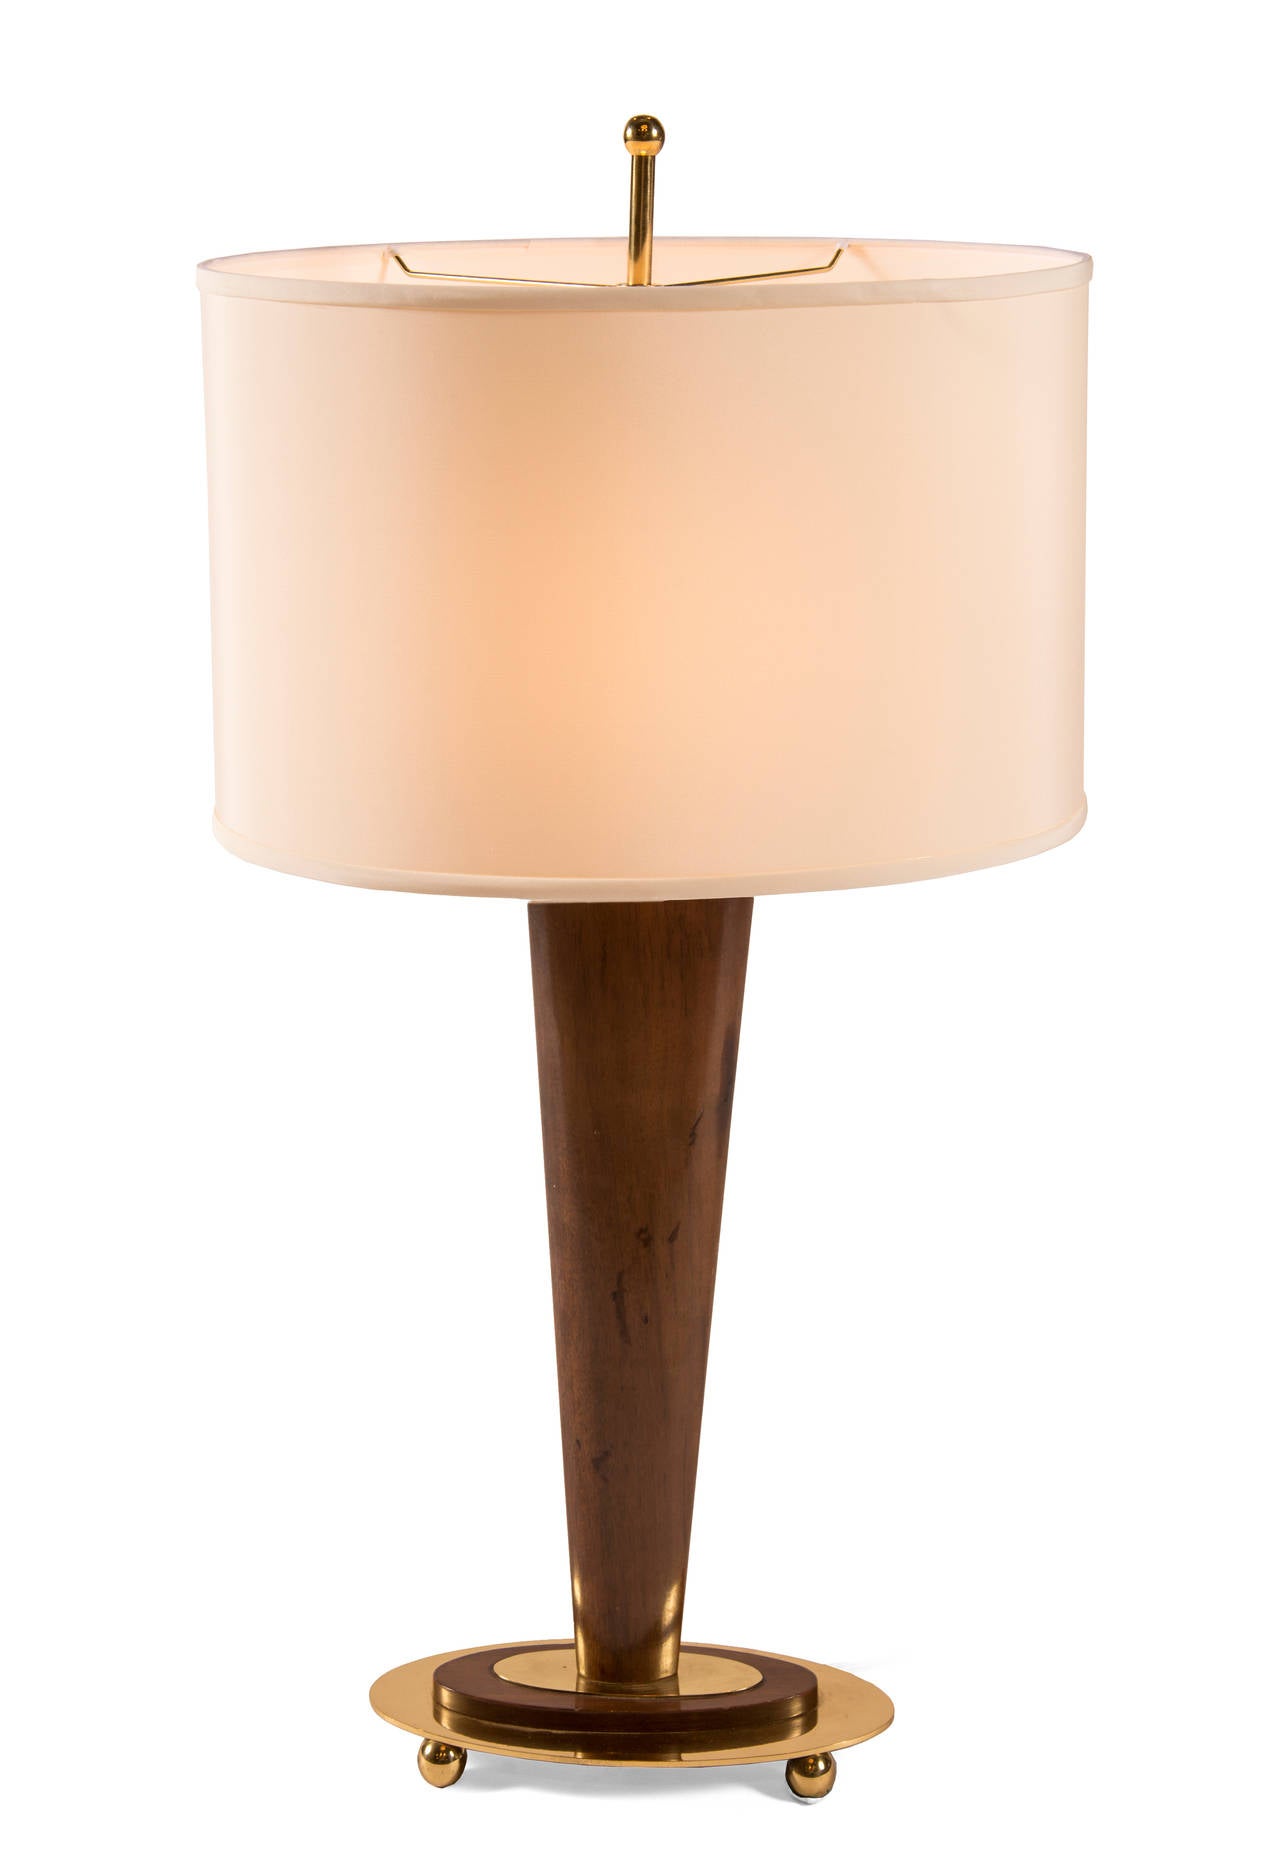 Single wooden oval and tapered table lamp on polished brass base with brass ball feet. Matching polished brass finial. Shade sold separately.

* There is only one lamp left, price is for one *